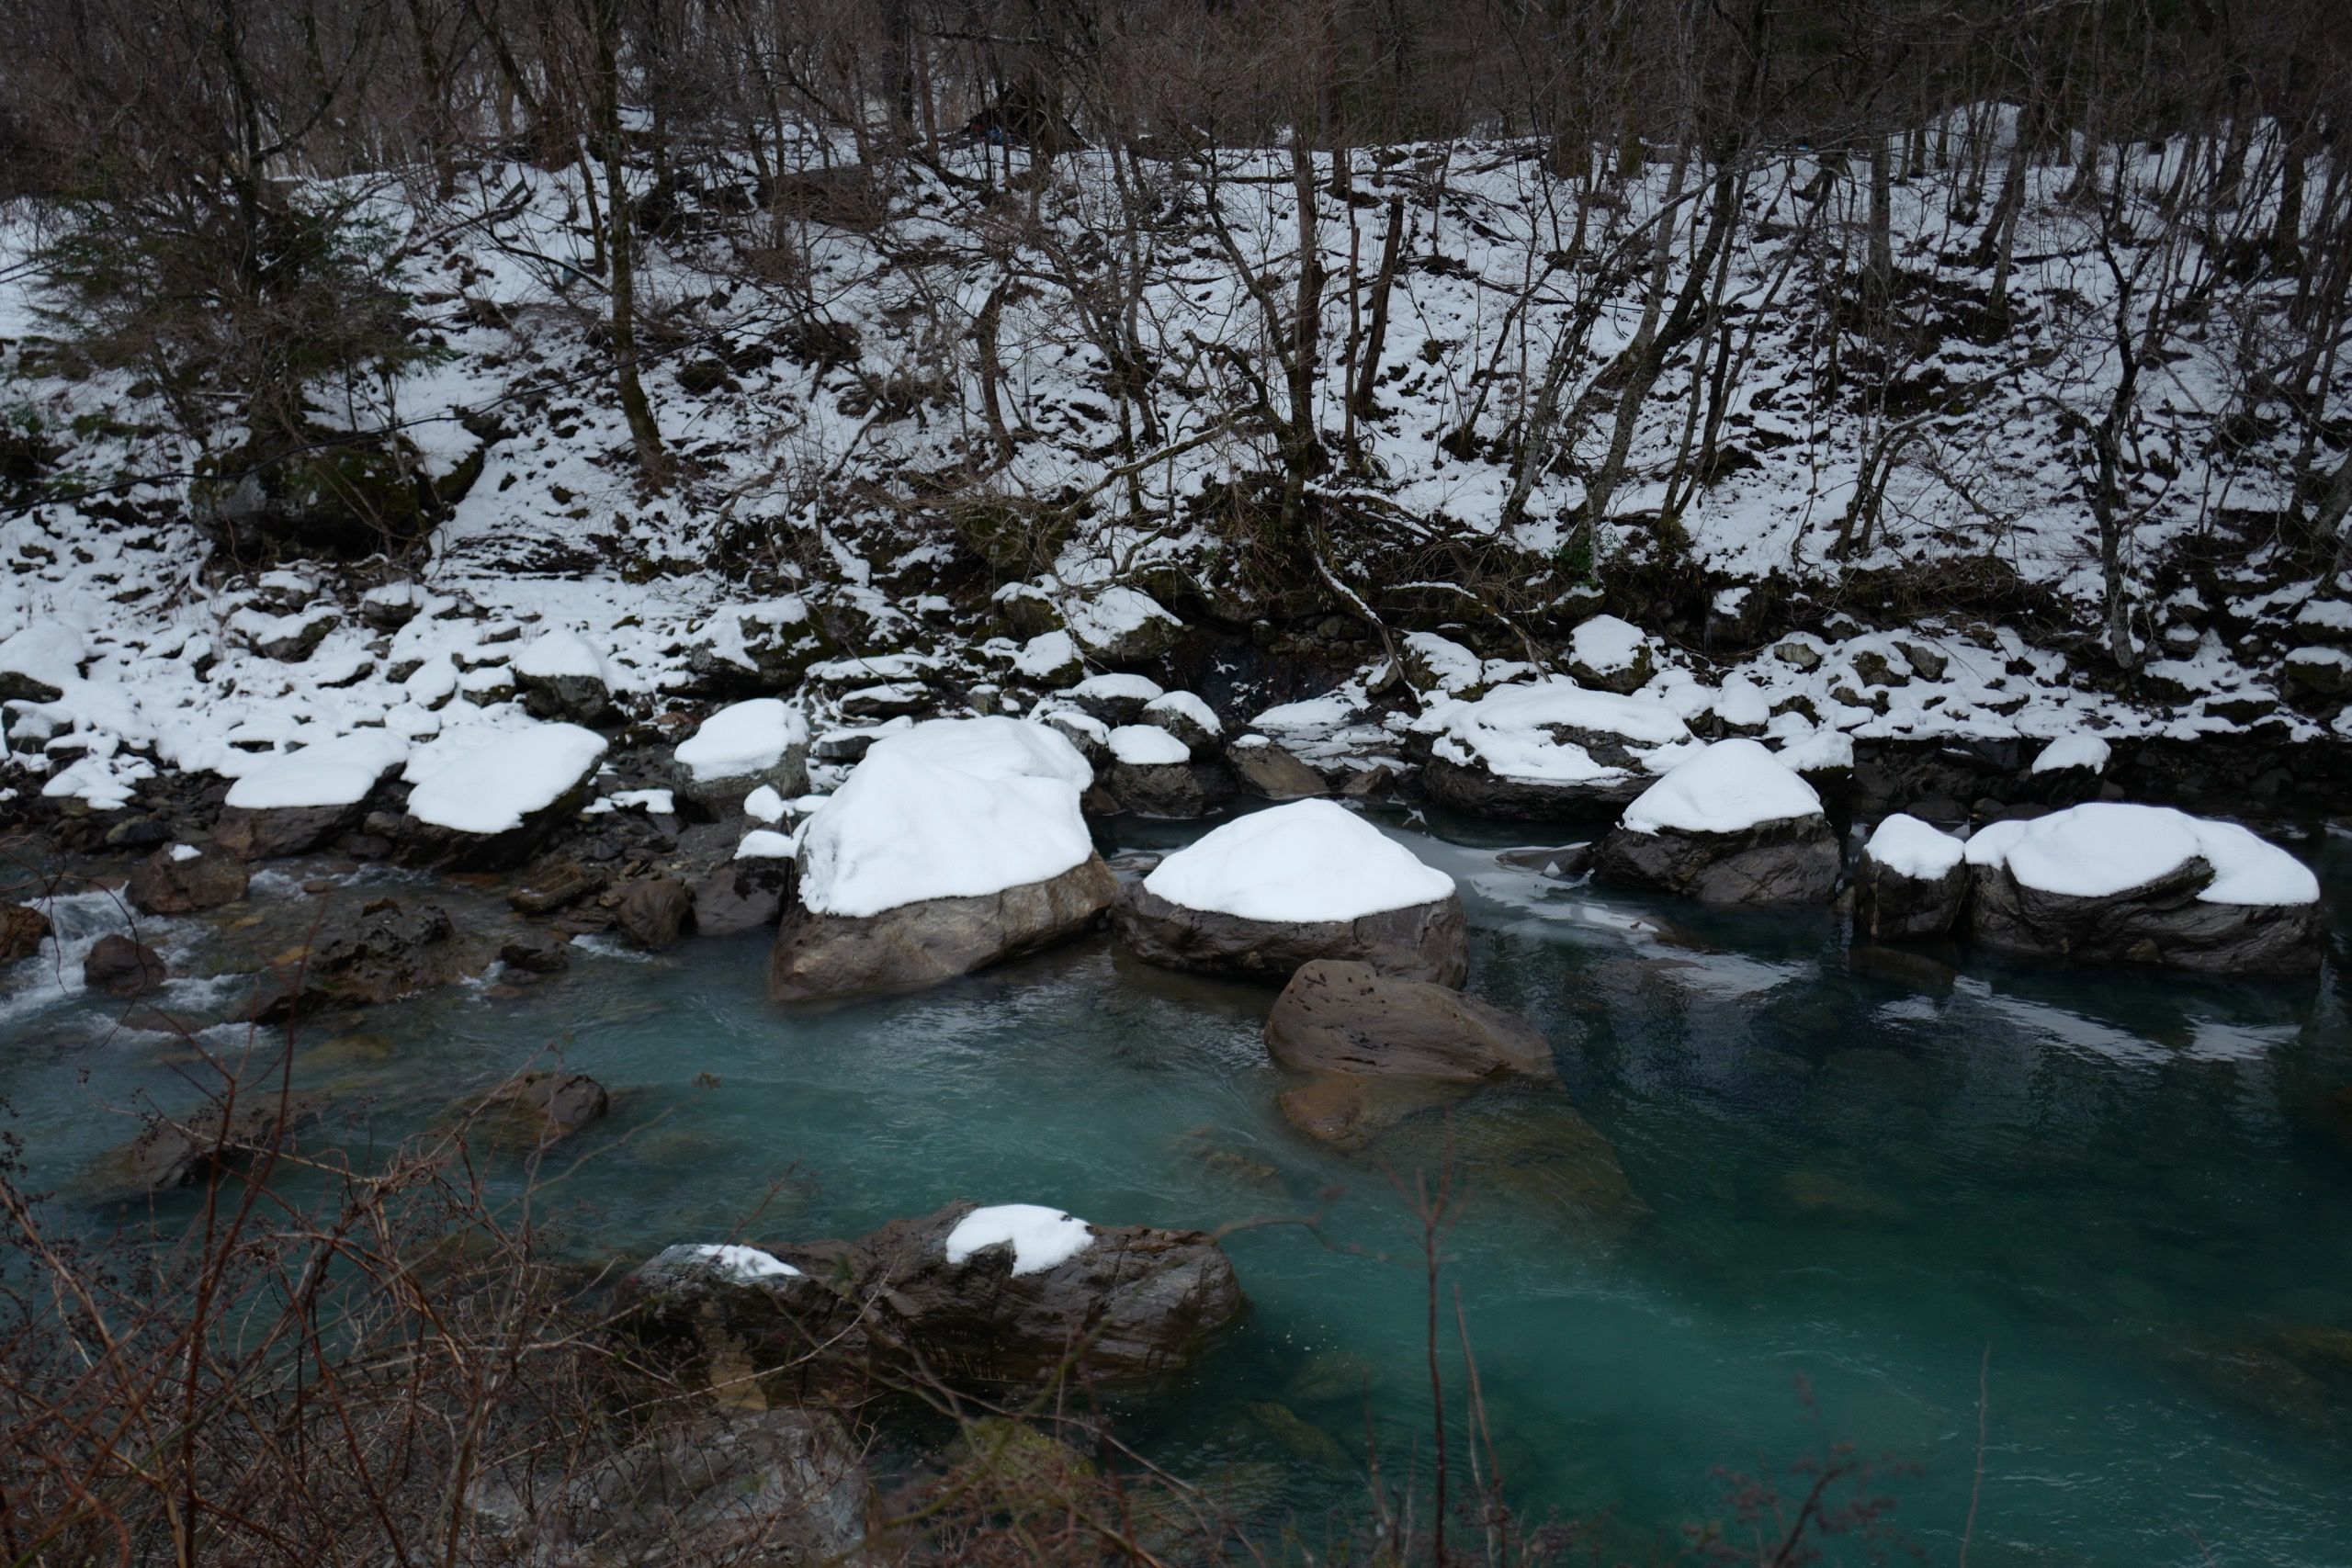 Snow-covered boulders in a turquoise-colored stream, with snow on its banks.